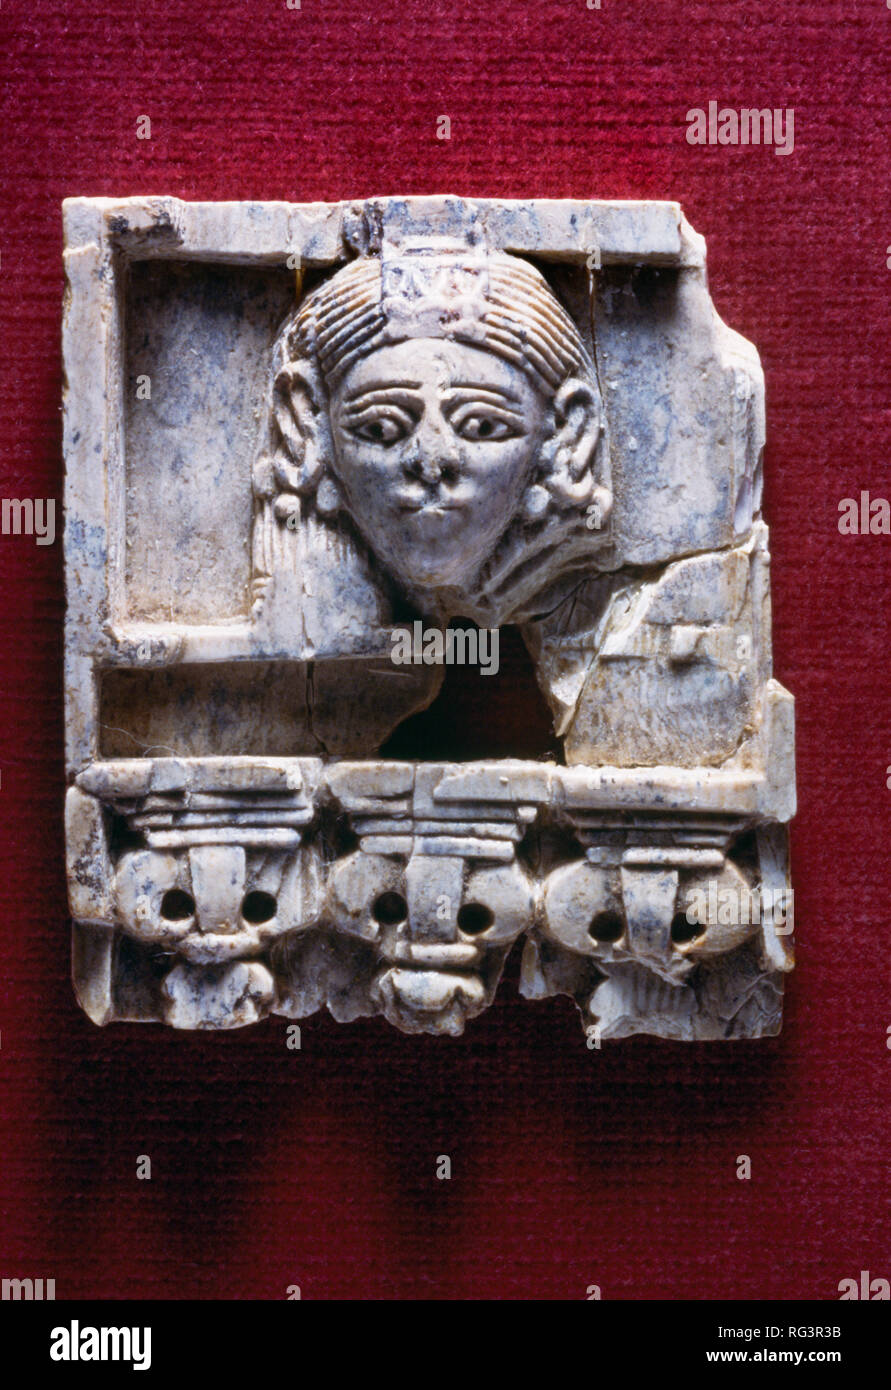 Woman at the window: Nimrud Ivory from Room SW37 Fort Shalmaneser within the Assyrian city of Nimrud, northern Iraq, photographed in Birmingham Museum Stock Photo